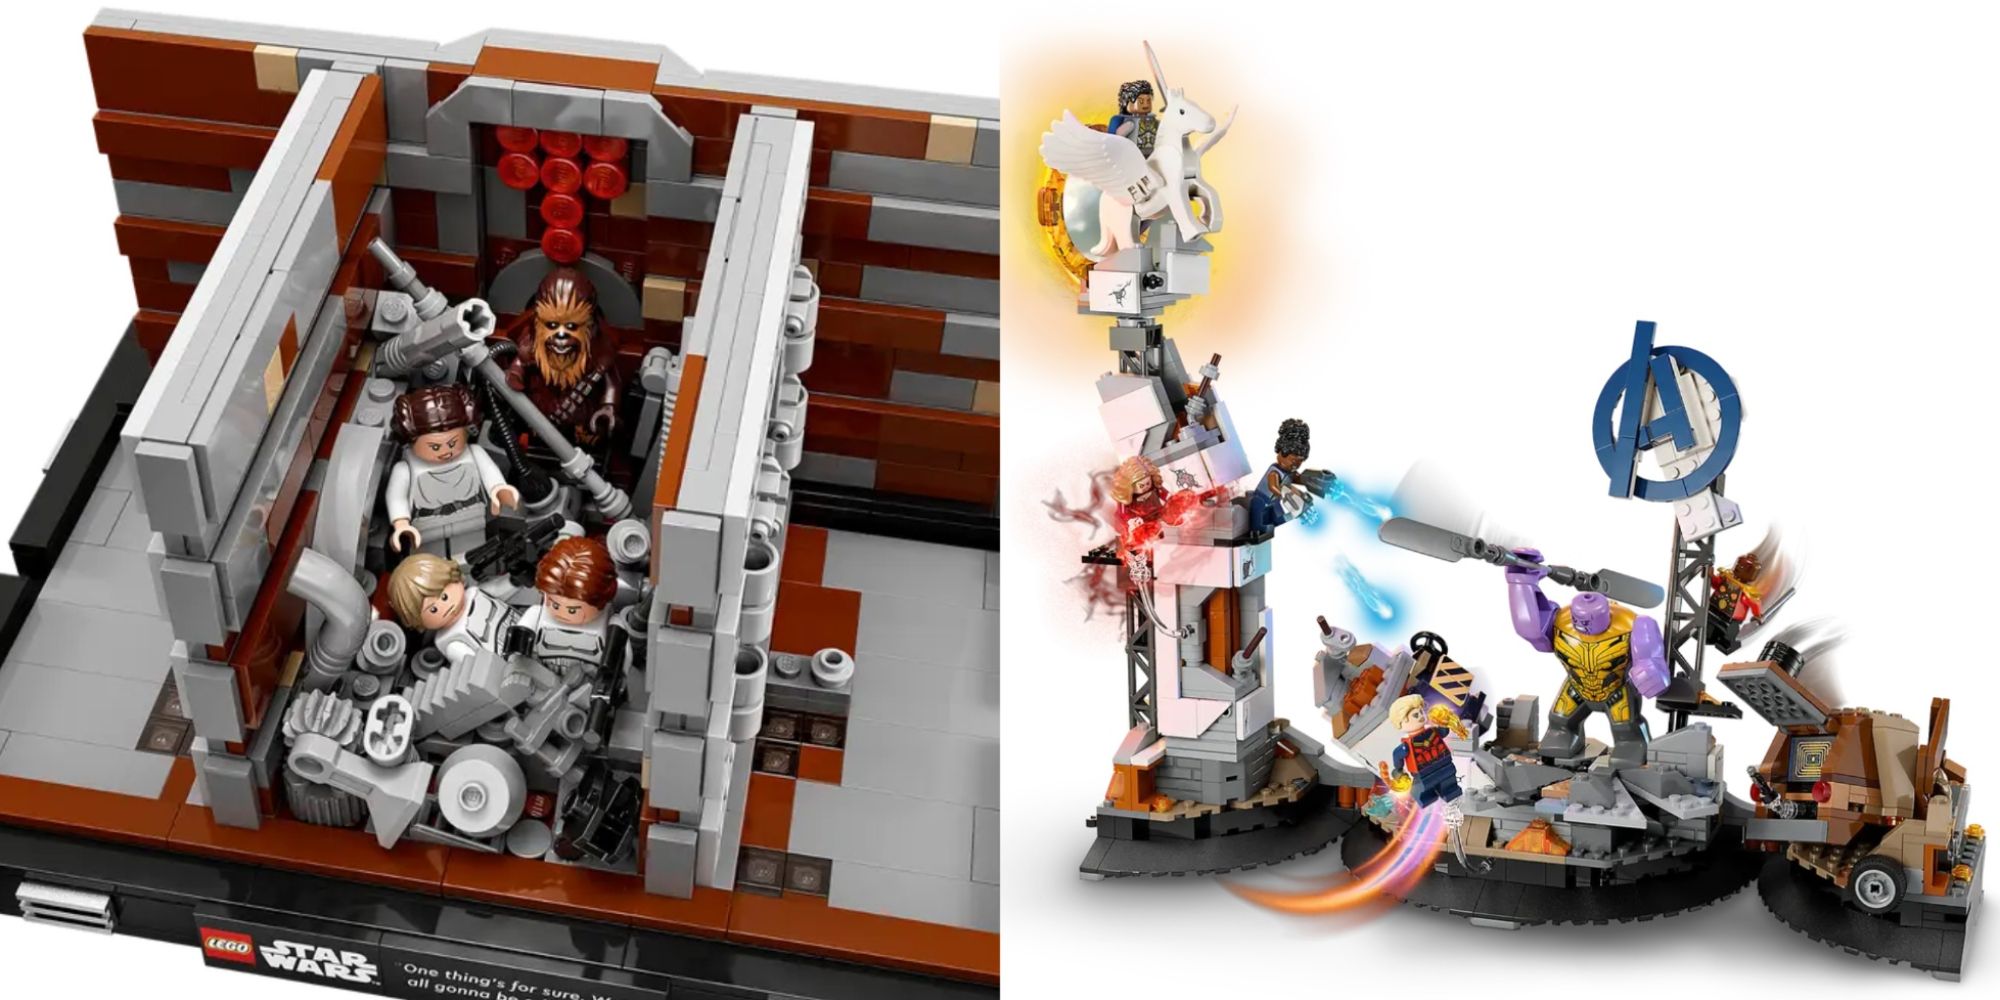 Movie Themed Lego Sets Featured Split Image Of Star Wars Trash Compactor and Avengers Endgame